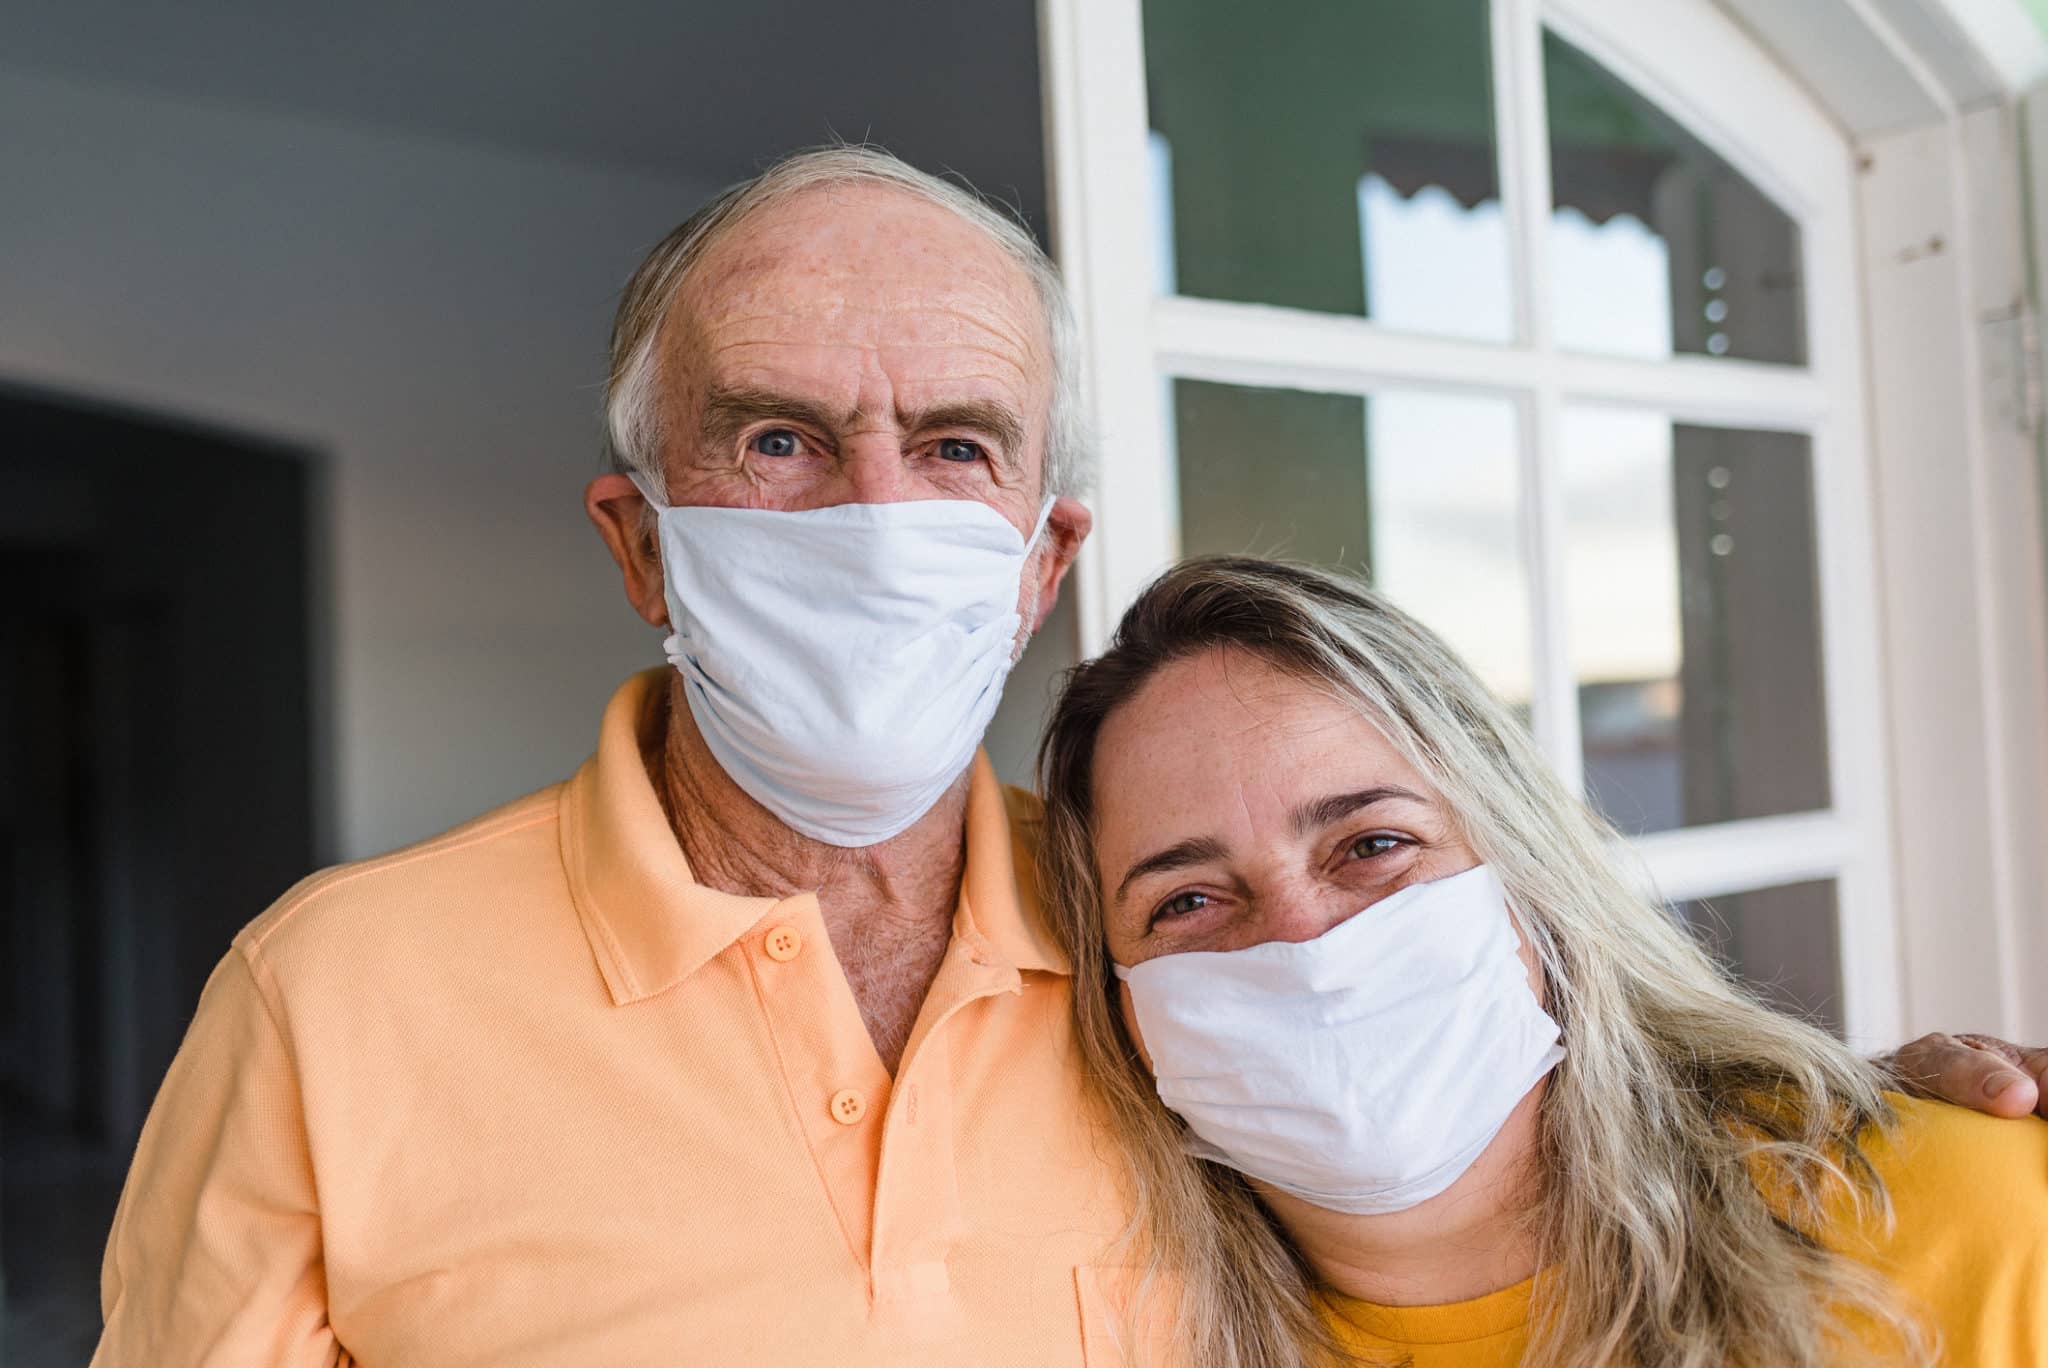 Dad and daughter holding each other using face mask